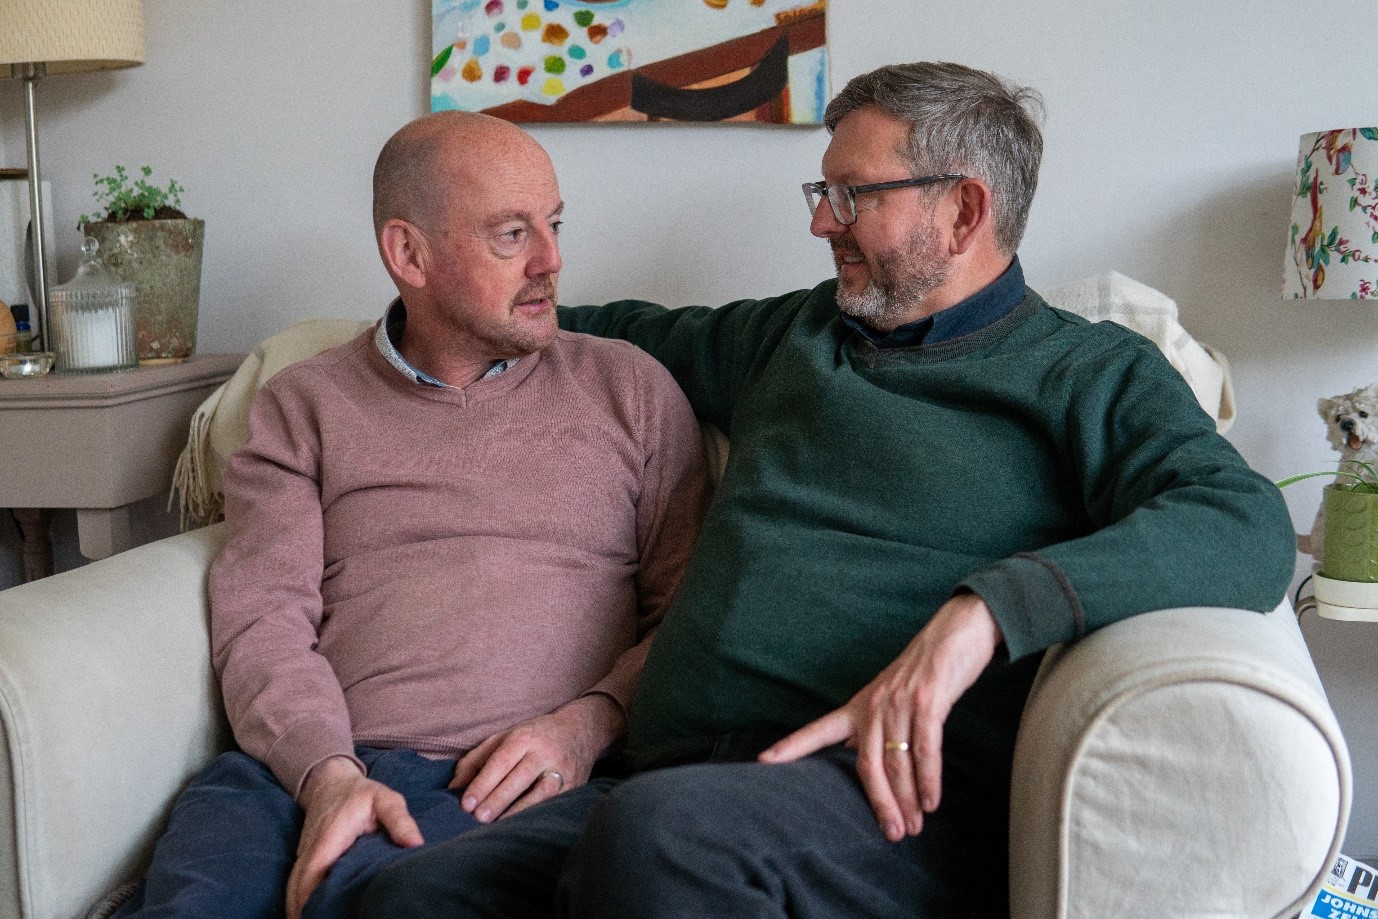 Two older men, a married couple, sit closely together on their sofa, in conversation. One is reassuring the other by putting his arm around him.